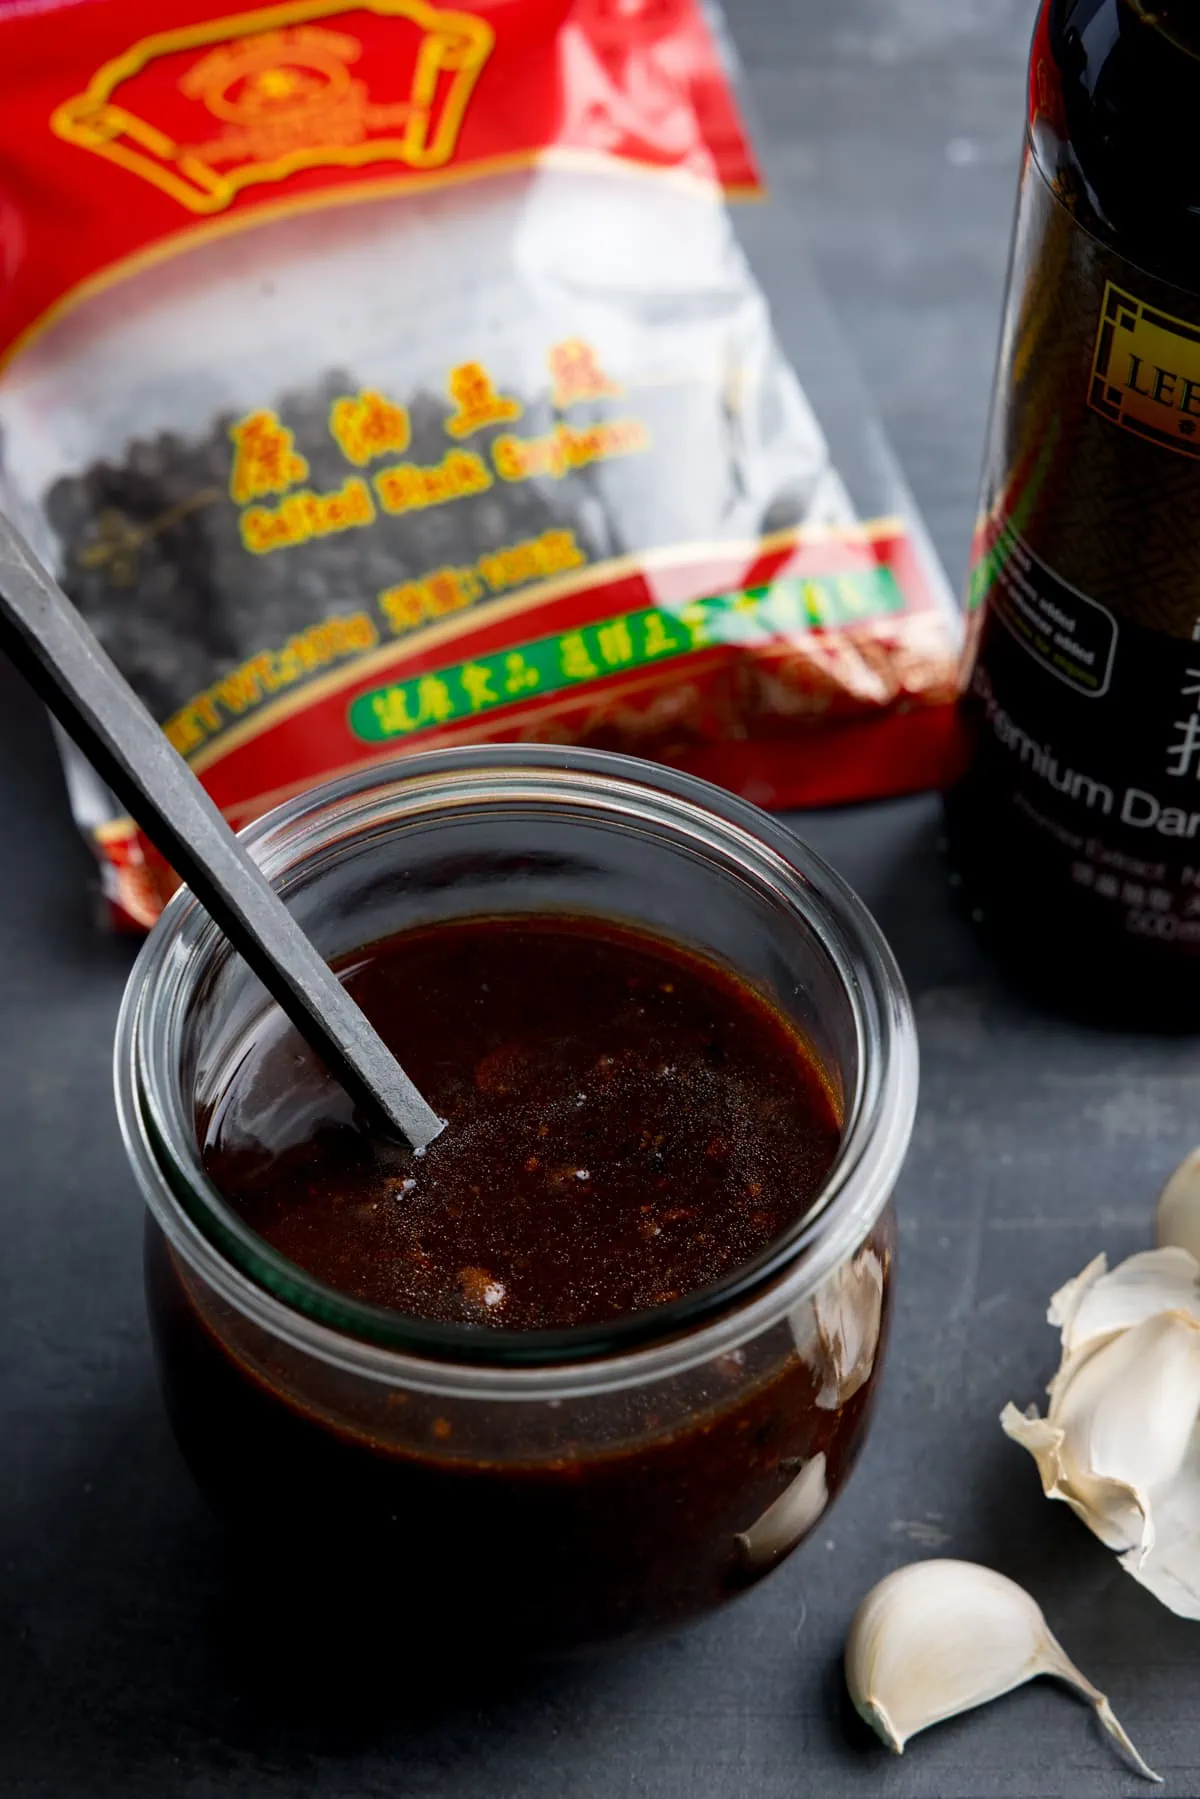 A glass jar filled with homemade black bean sauce. There is a black spoon sticking out of the jar. The jar is on a dark surface and there are ingredients in the background